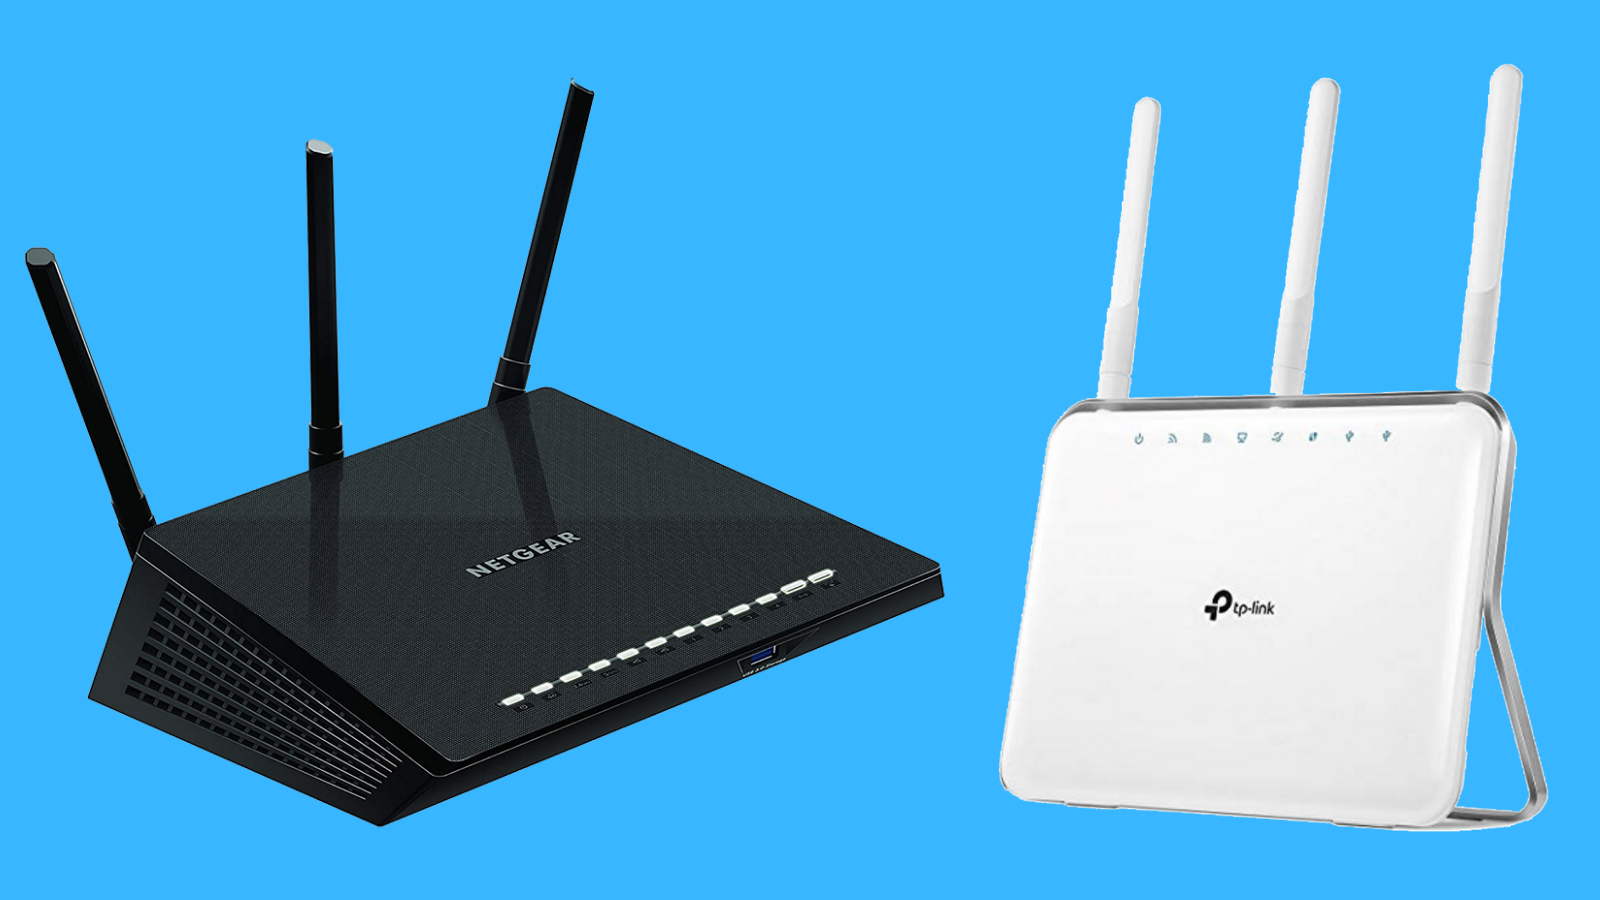 15 Best Routers Under 100 In 2020 For Entertainment And Productivity